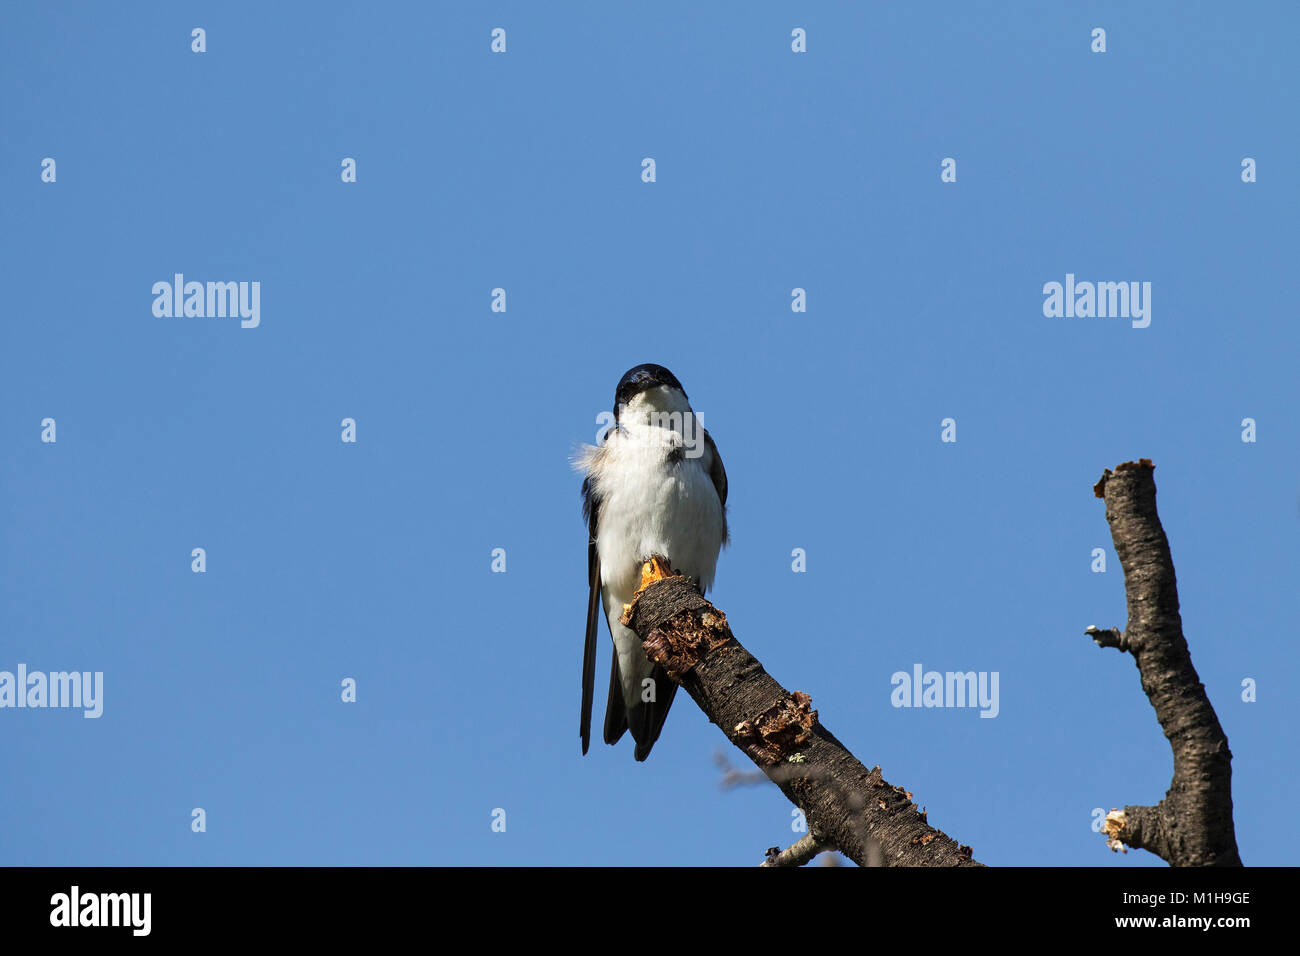 Chilean swallow Tachycineta meyeni perched in a tree Torres del Paine National Park Patagonia Chile South America December 2016 Stock Photo